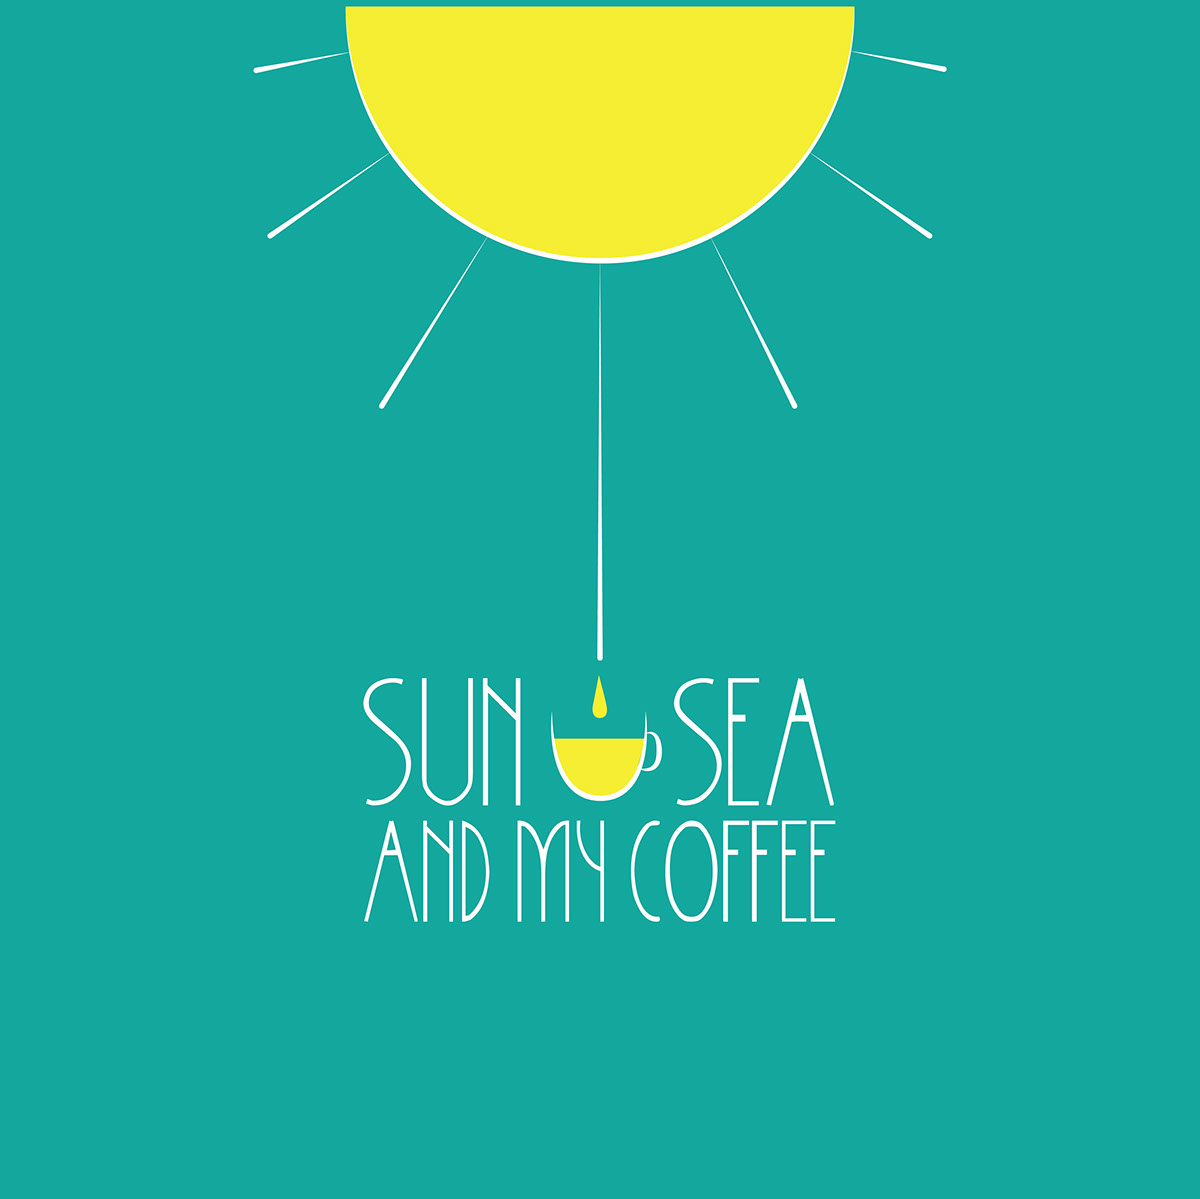 Sun Sea and my coffee rendition image